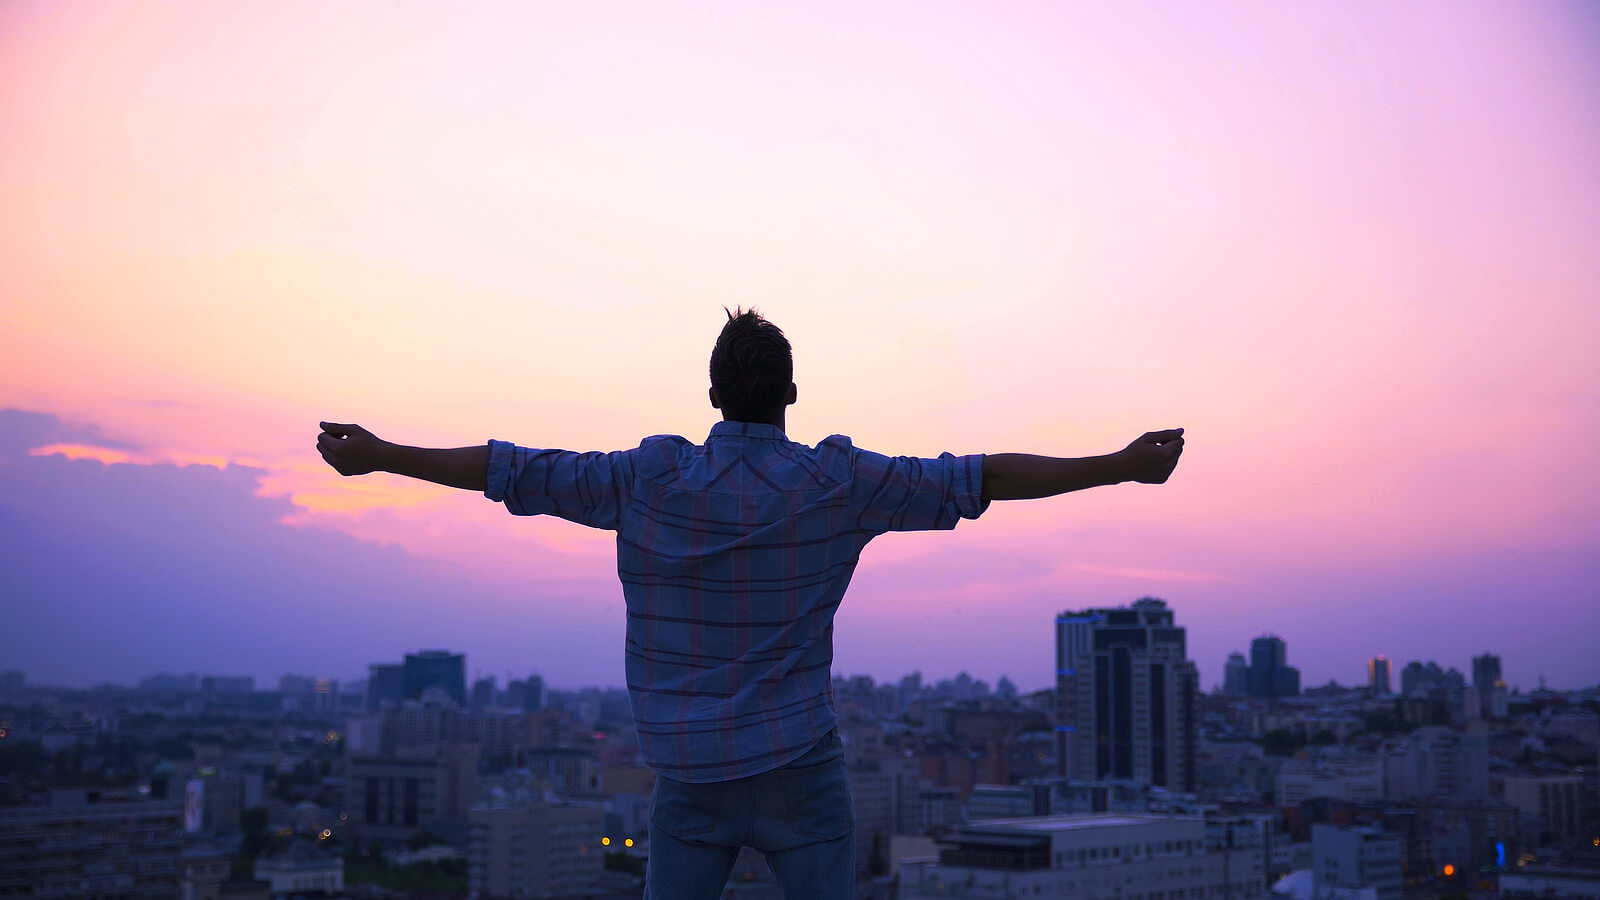 Photo of a man standing on a roof with his arm outstretched feeling free with a purple and pink sunset sky. Break free from your sexual addiction. Meet with a skilled therapist to recover with sexual addiction therapy in Georgia.